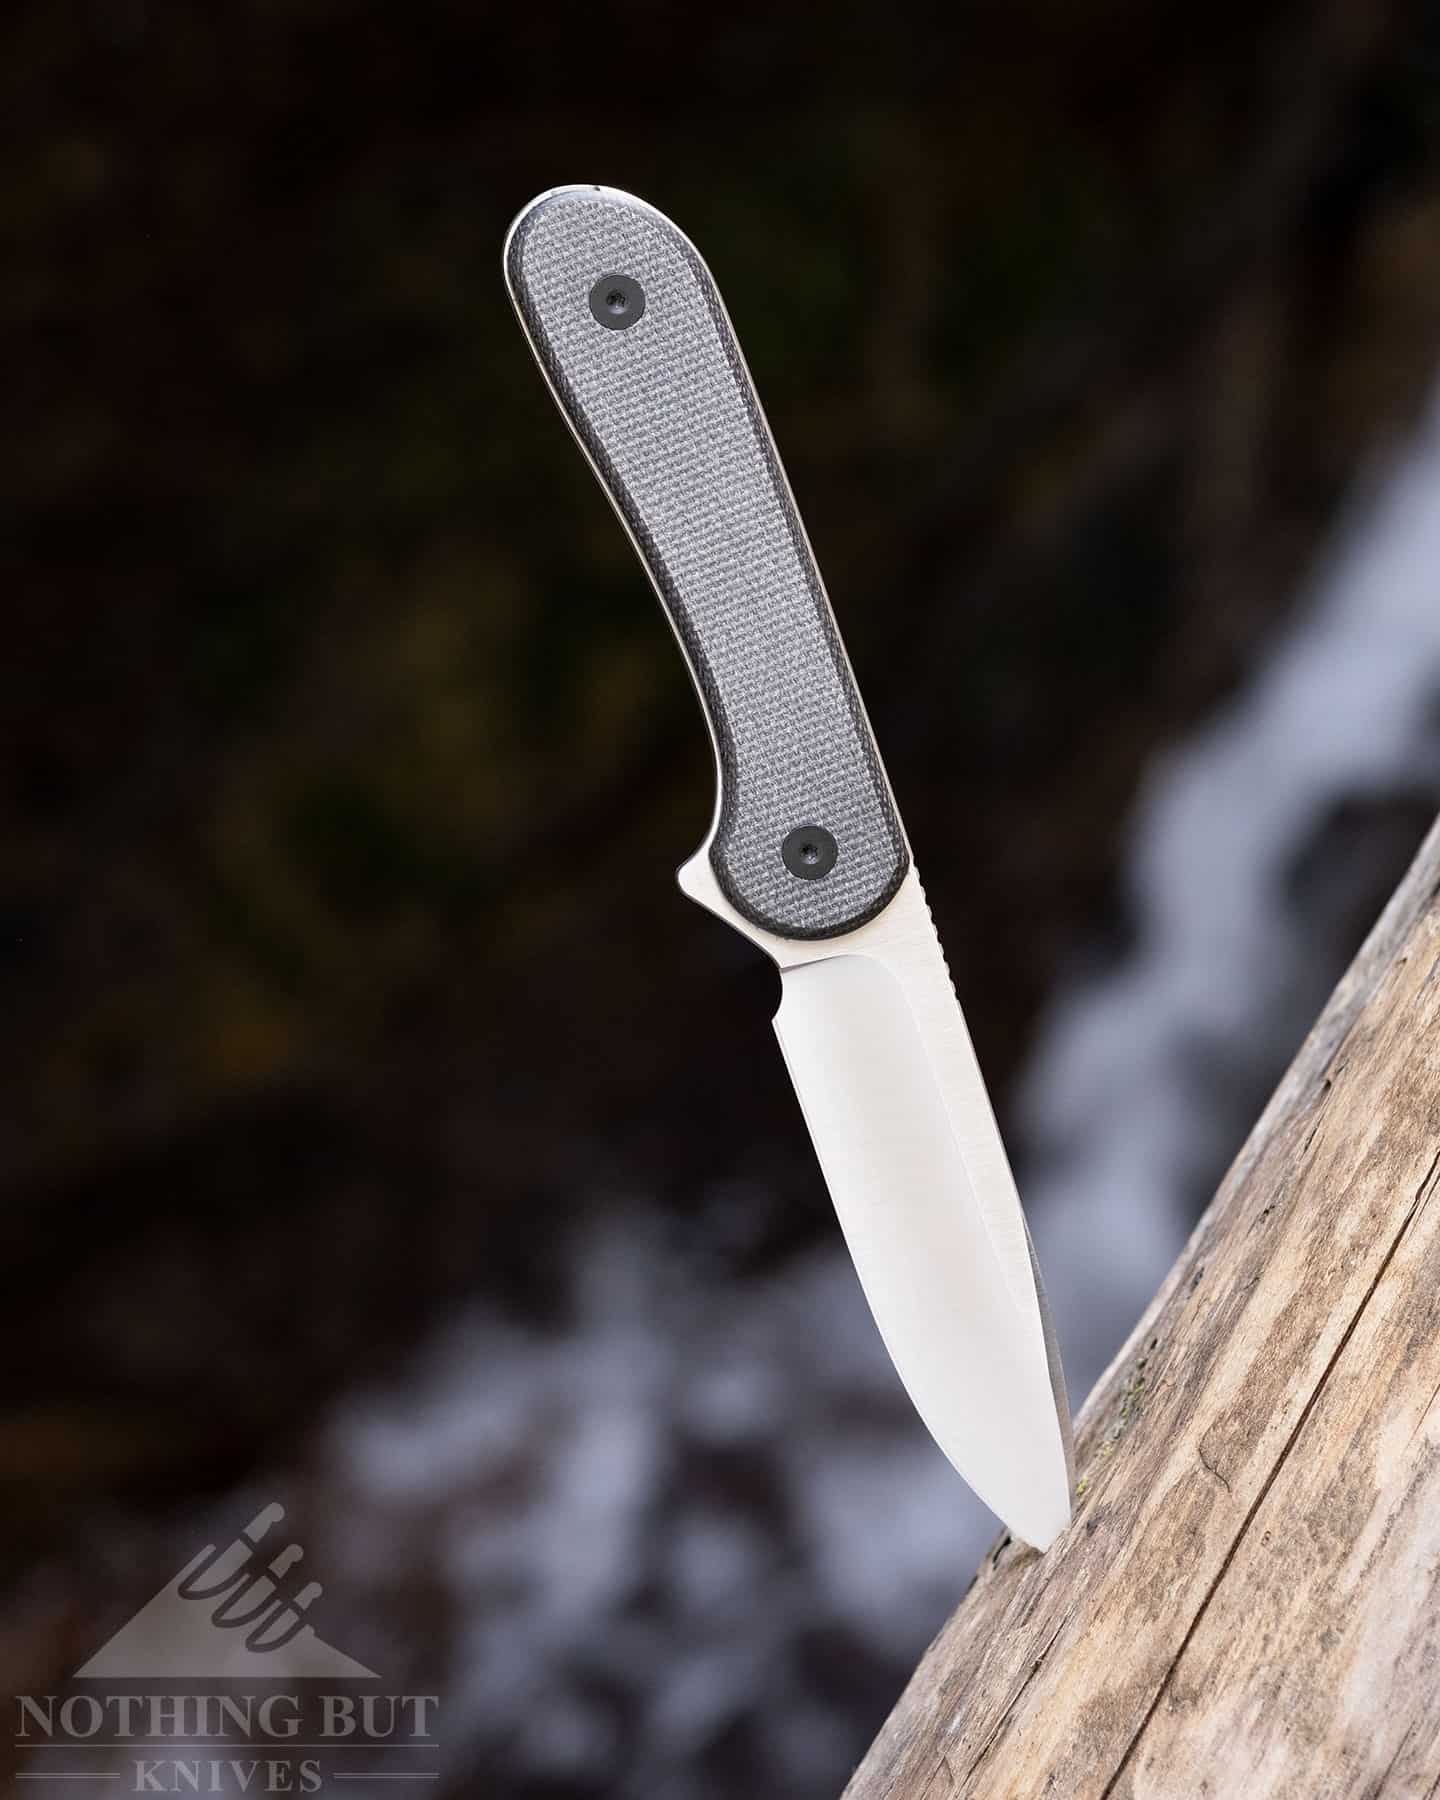 The Civivi Elenmtum FIxed Blade is a great tool for the outdoors.